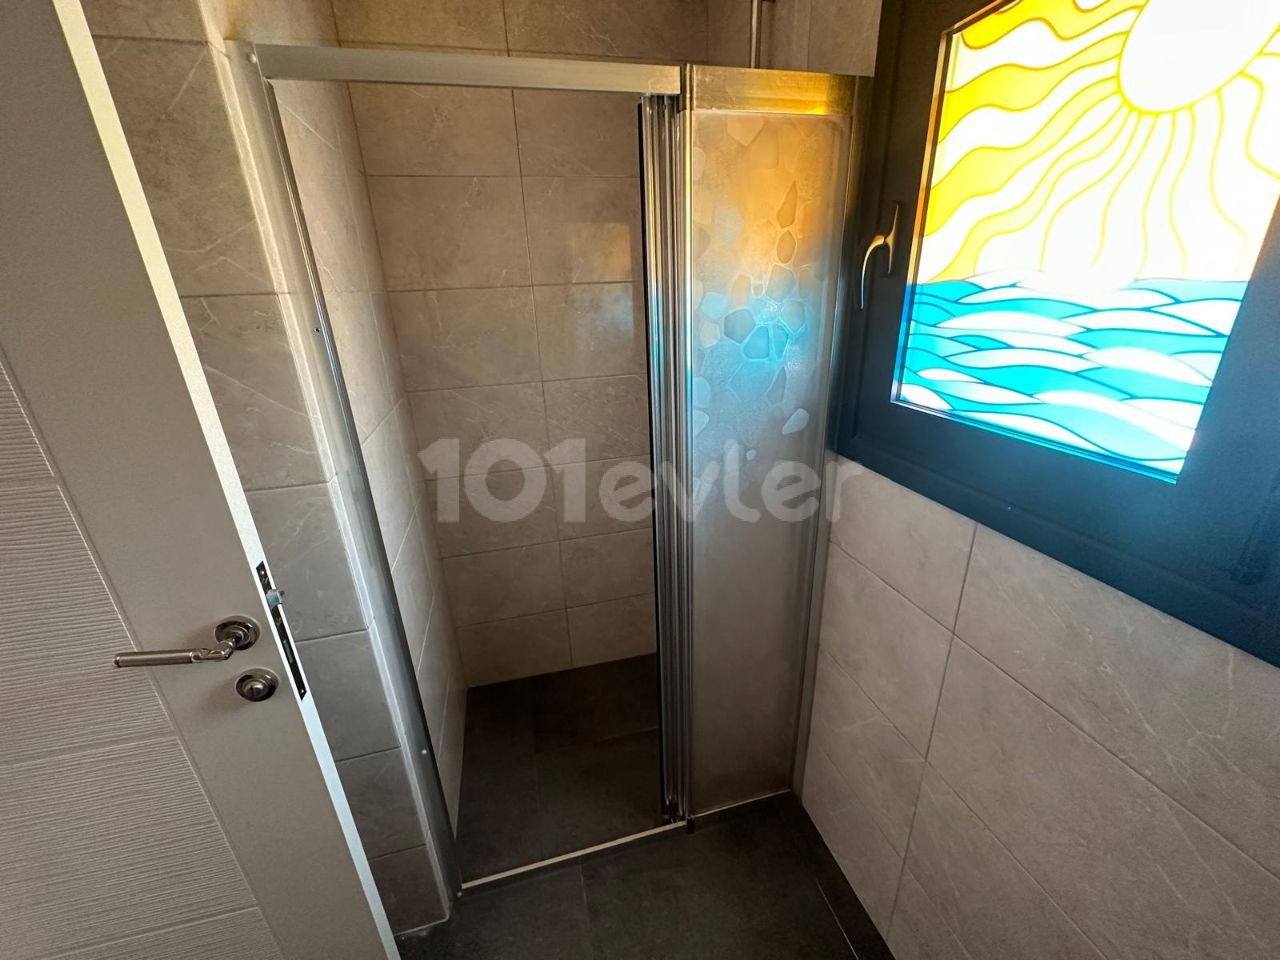 FLAT FOR RENT ON THE STREET WITH MONTHLY PAYMENT IN METEHAN AREA